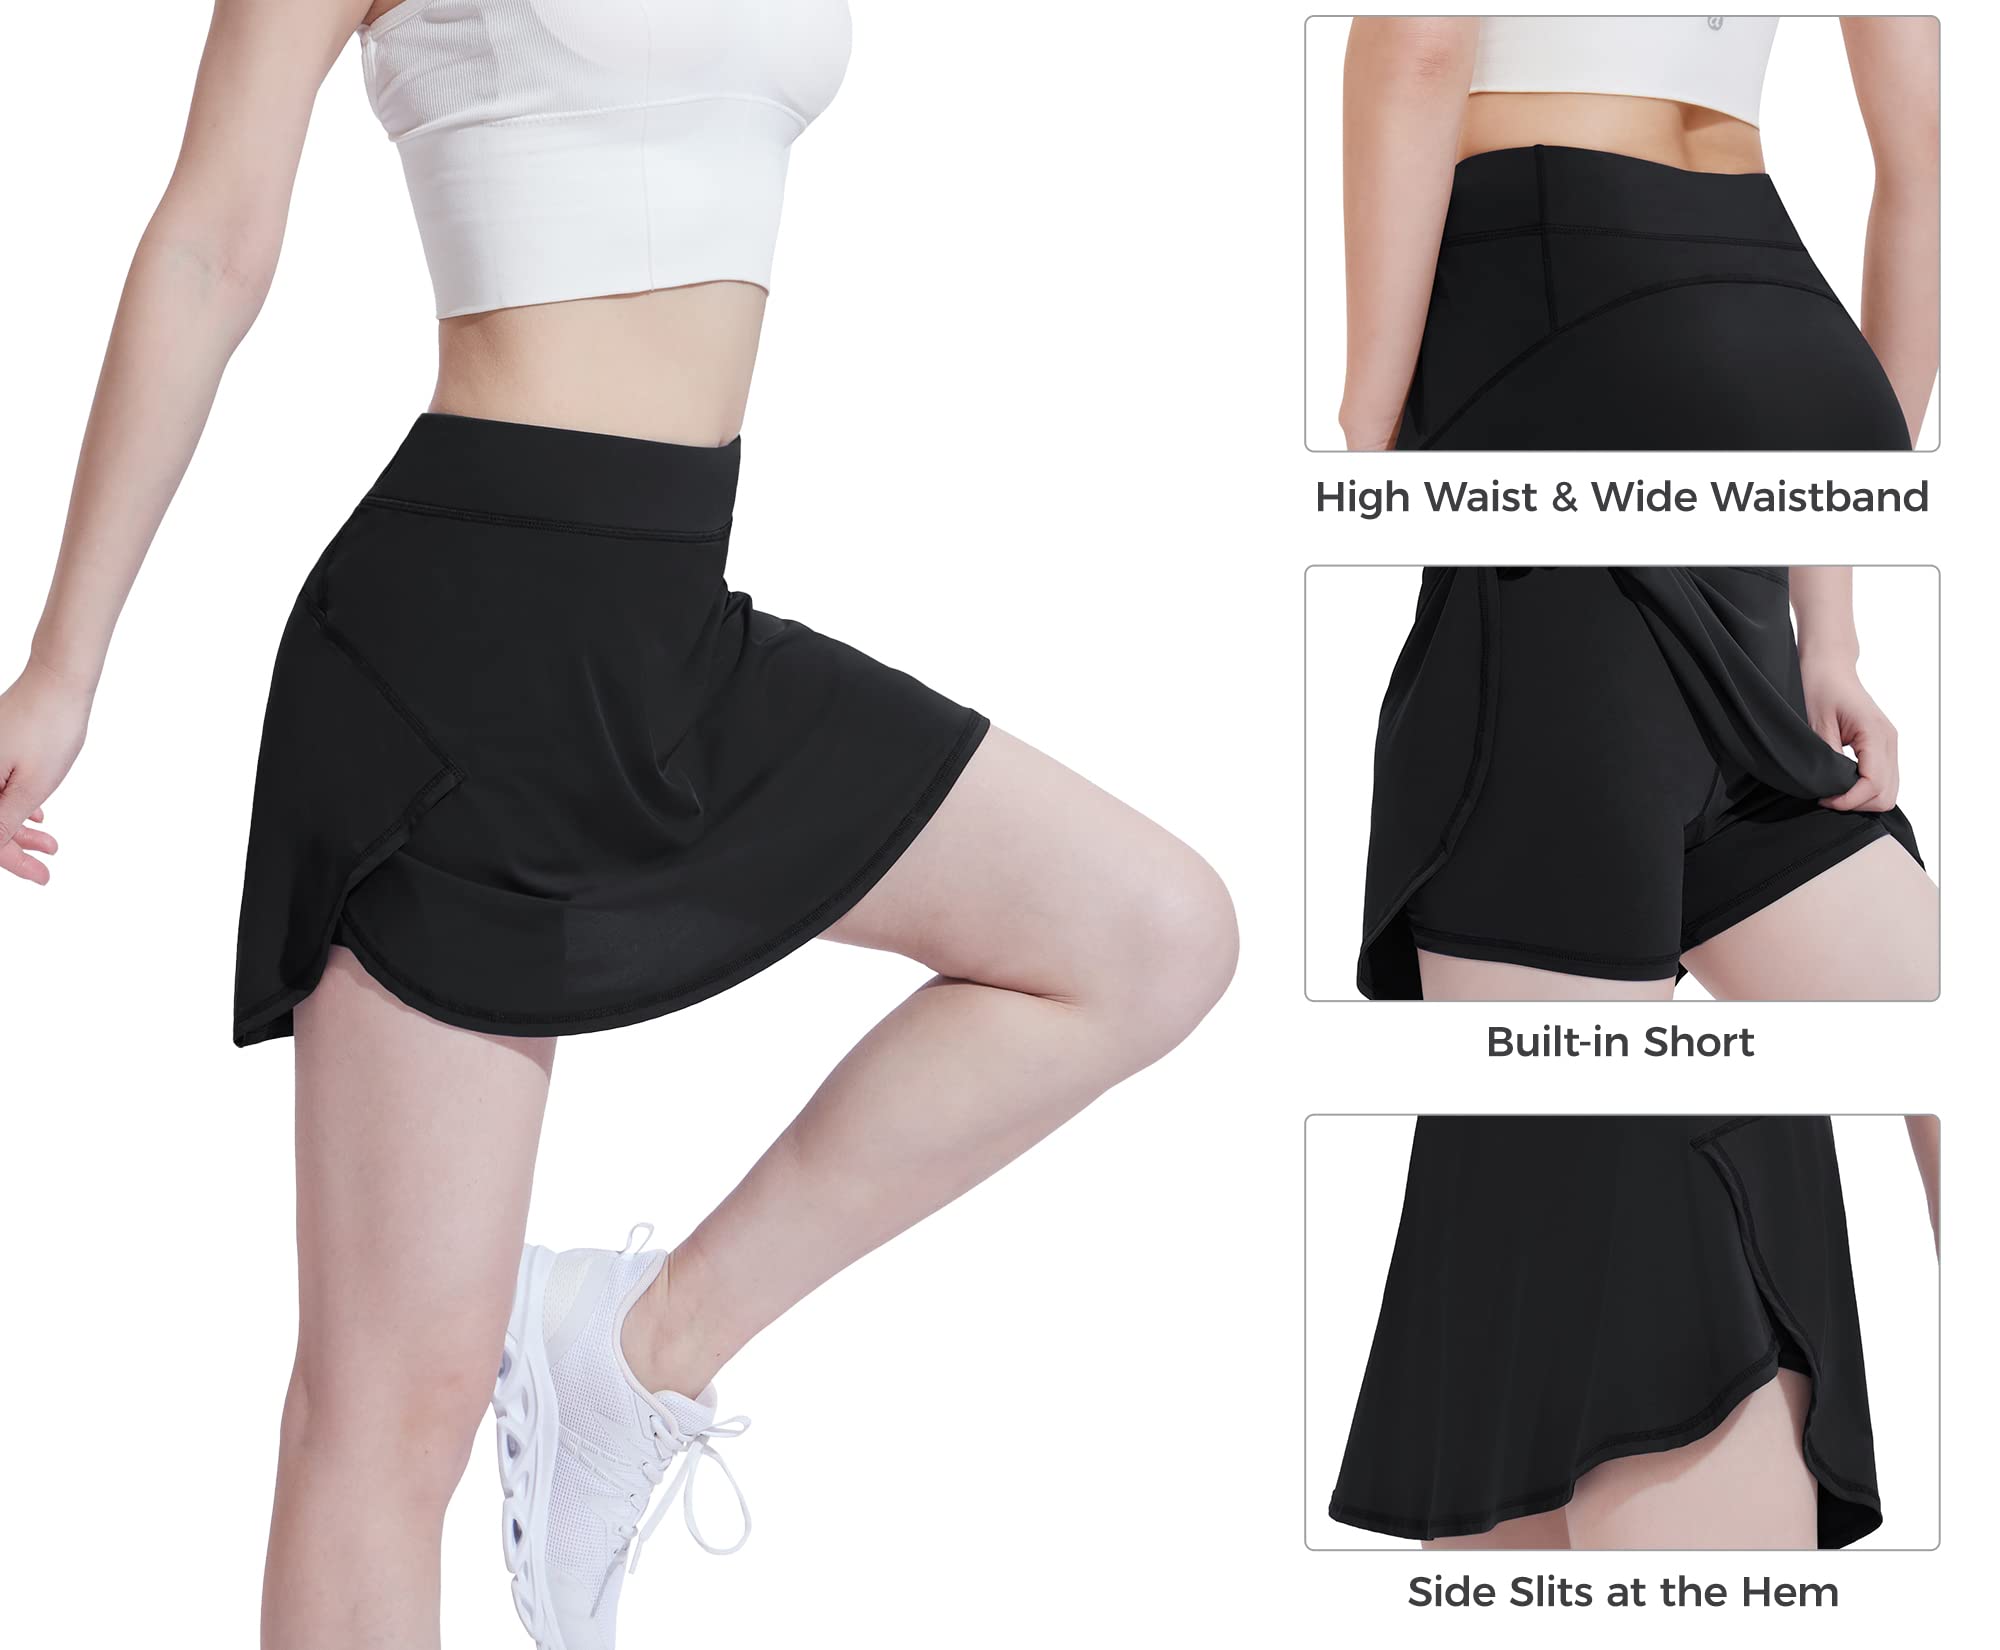 CAMEL CROWN Women's Pleated Tennis Skirt Active Athletic Golf Skort High Waisted Built-in Shorts for Running Workout Sports